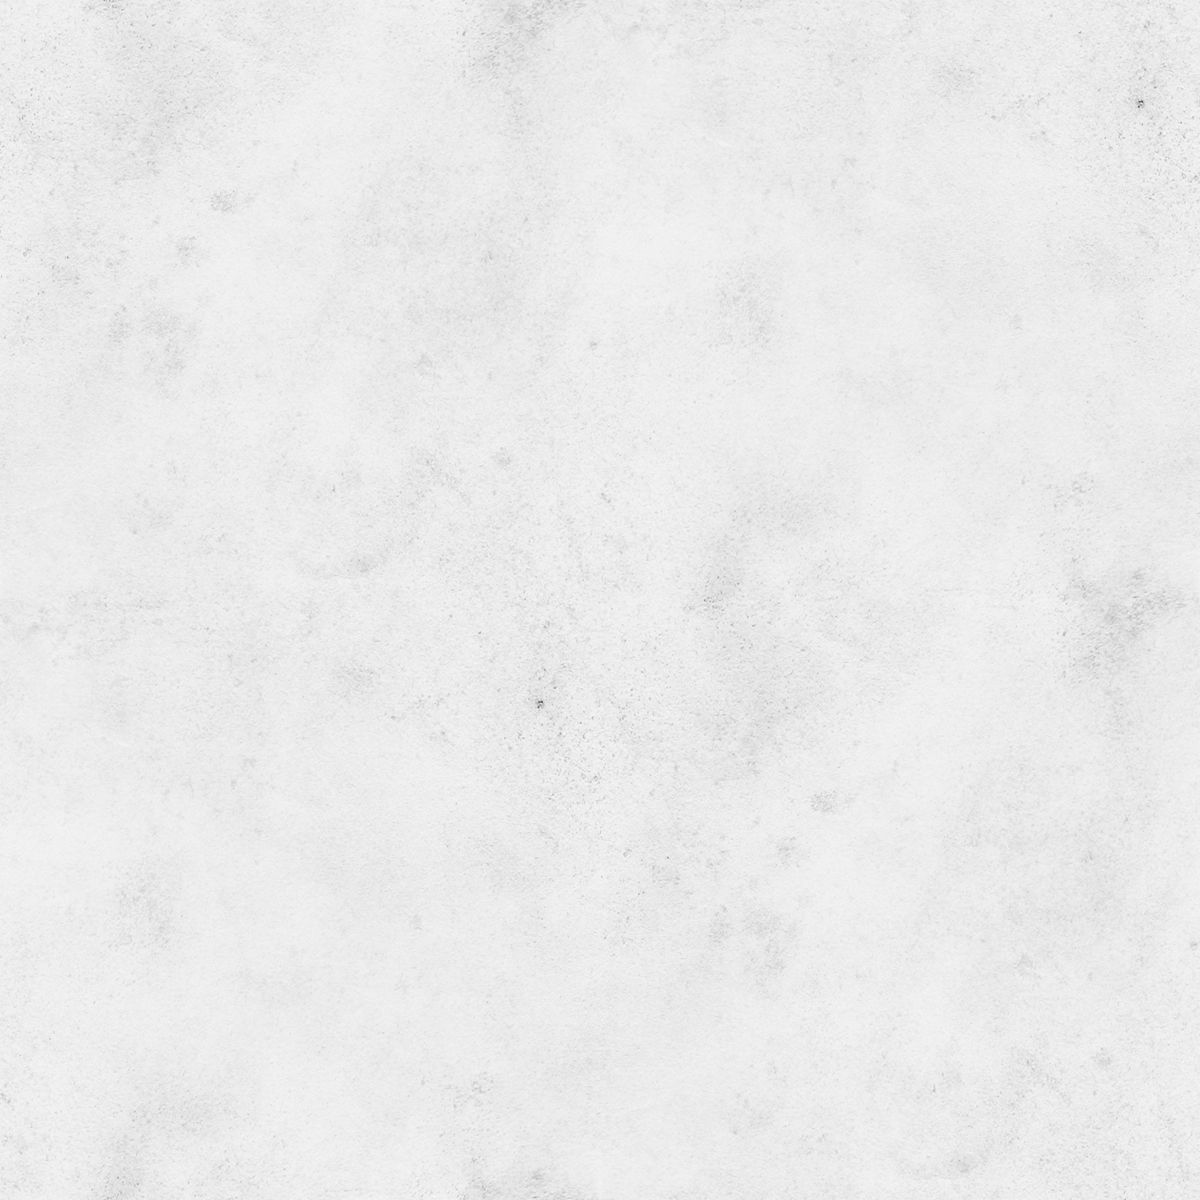 Free High Resolution Textures - Lost and Taken - 30 Free Seamless